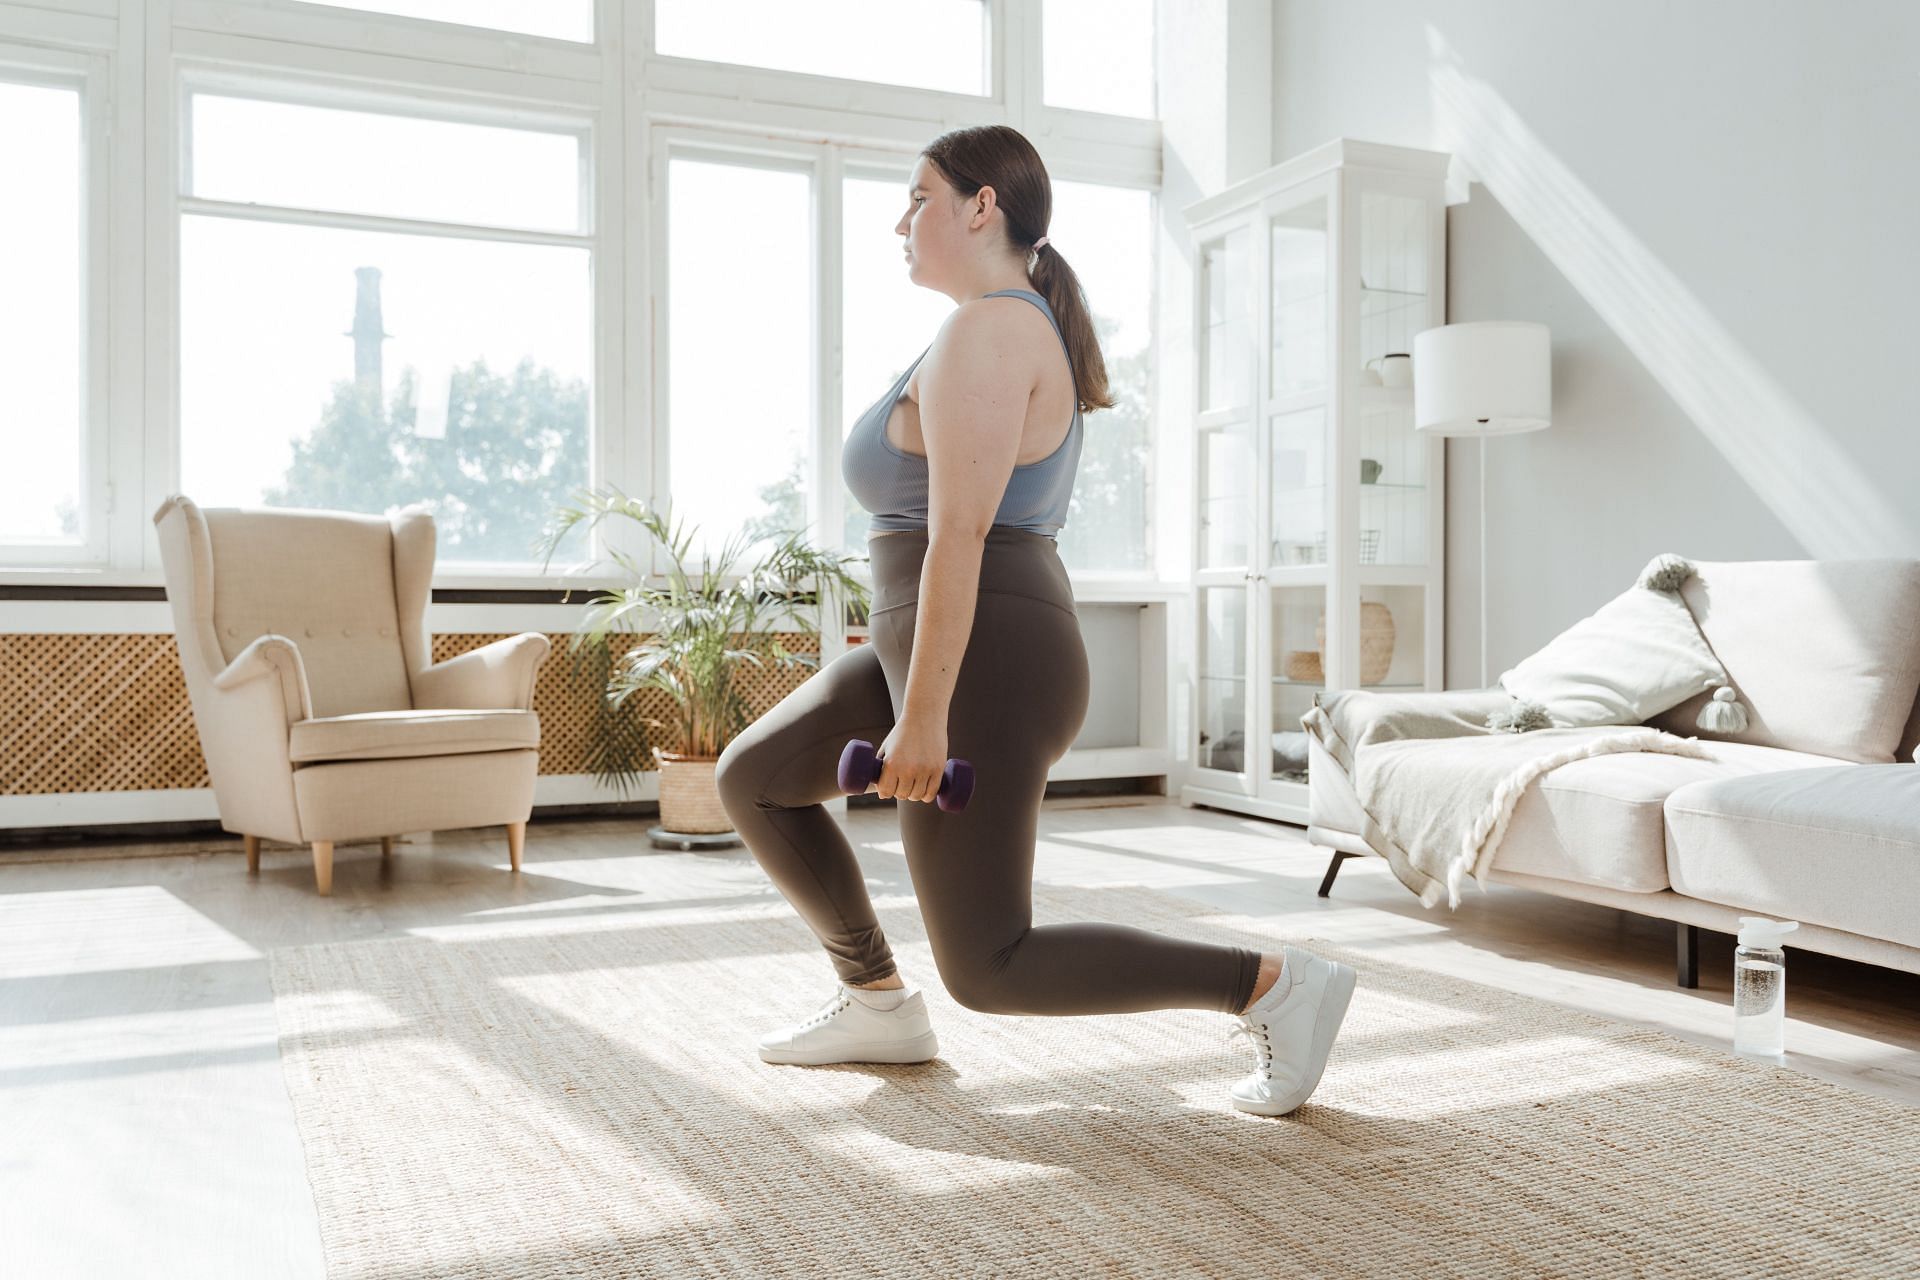 This exercise can also improve balance. (Image via Pexels/ Mart Production)